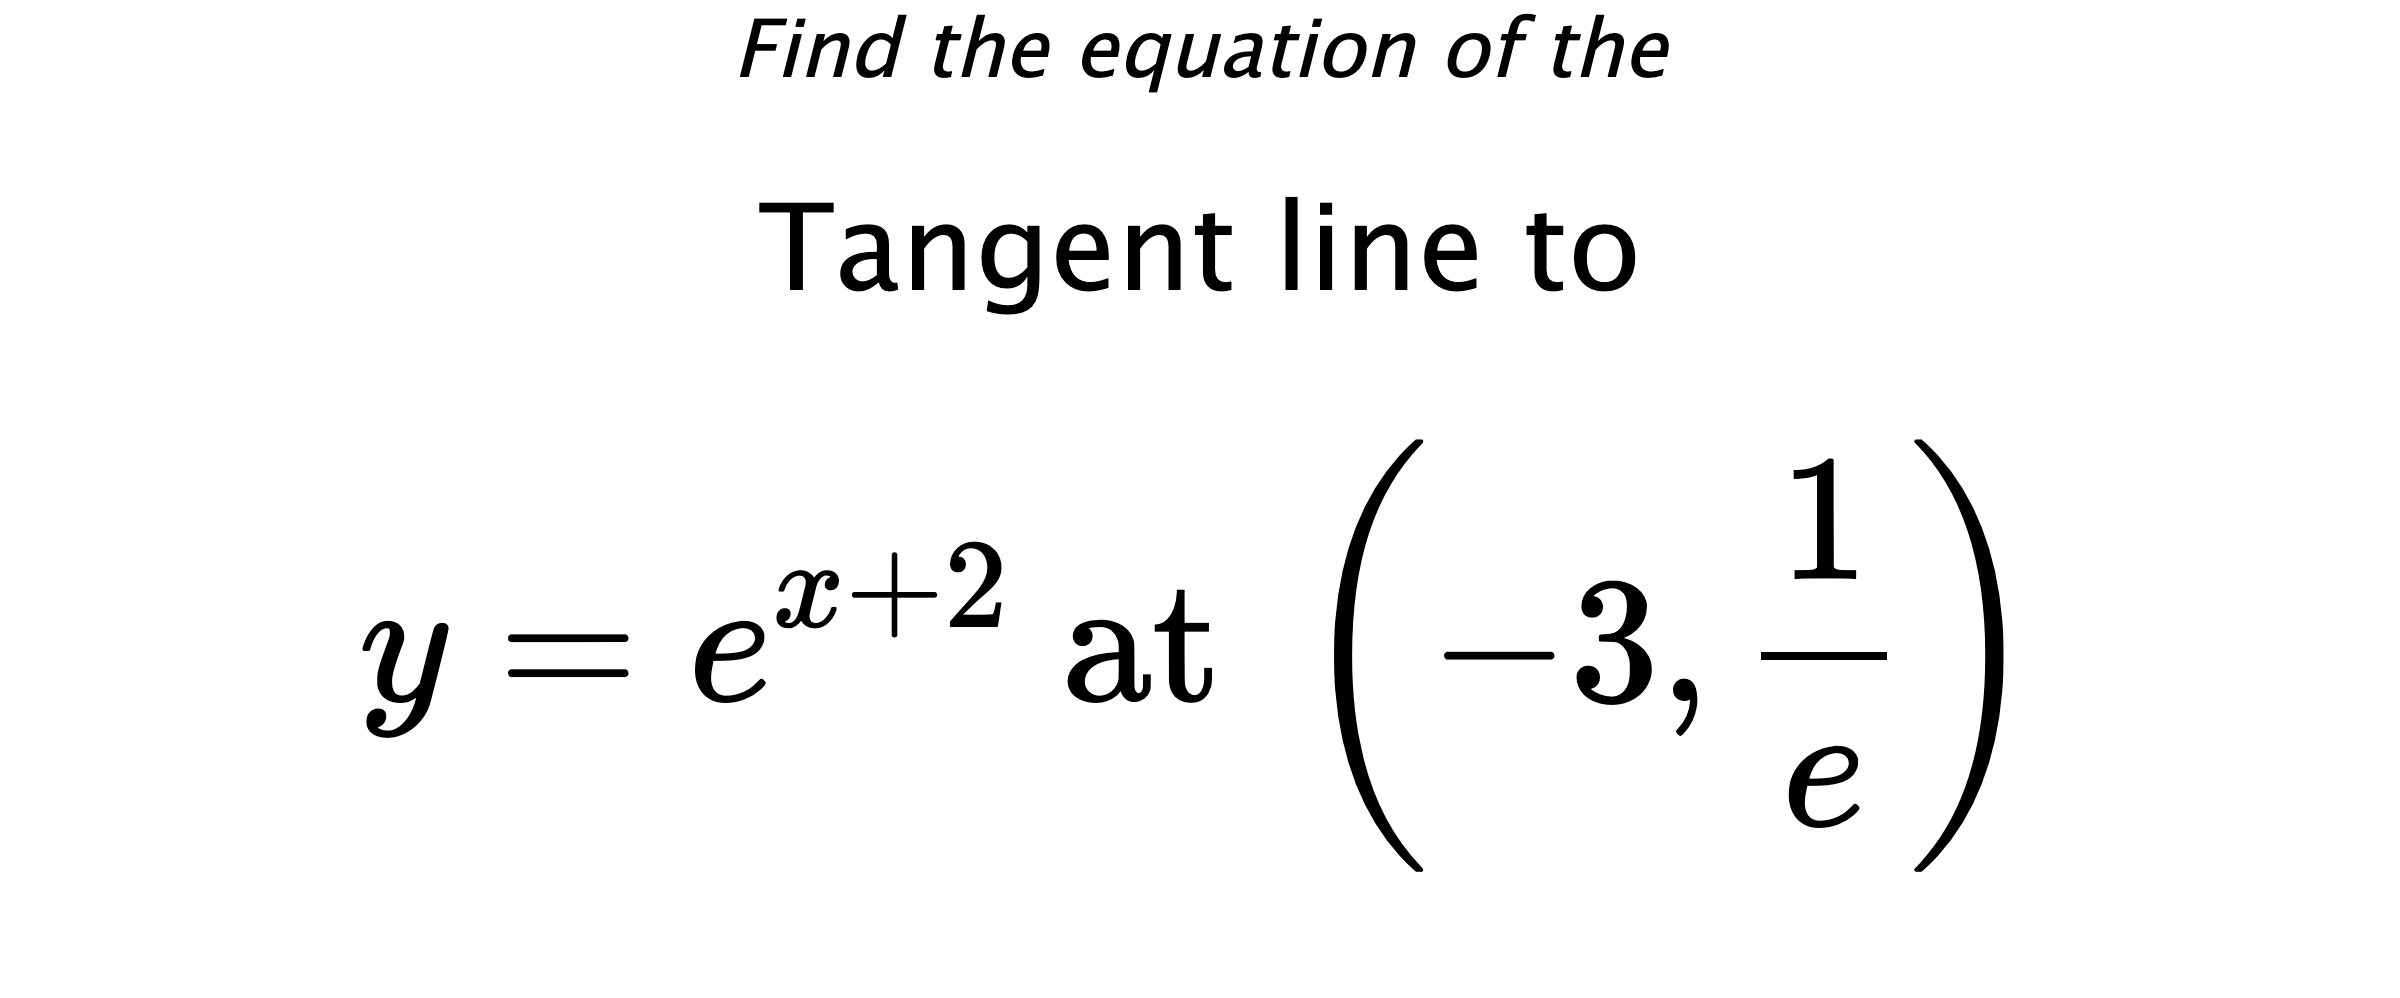 Find the equation of the Tangent line to $$ y=e^{x+2} \text{ at } \left(-3,\frac{1}{e}\right) $$